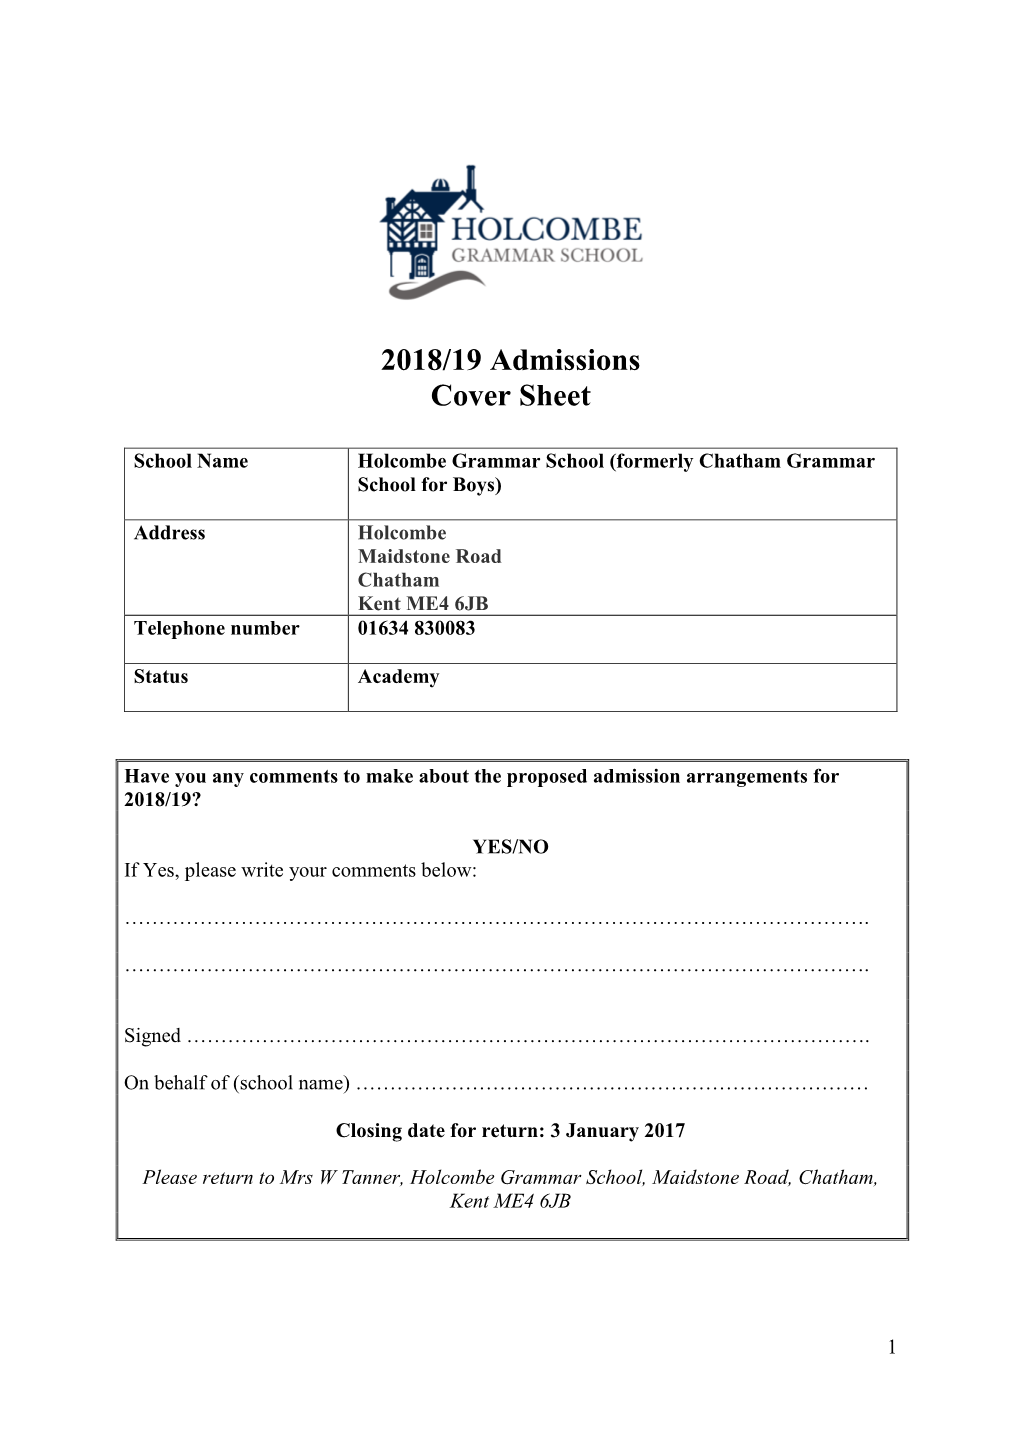 2018/19 Admissions Cover Sheet